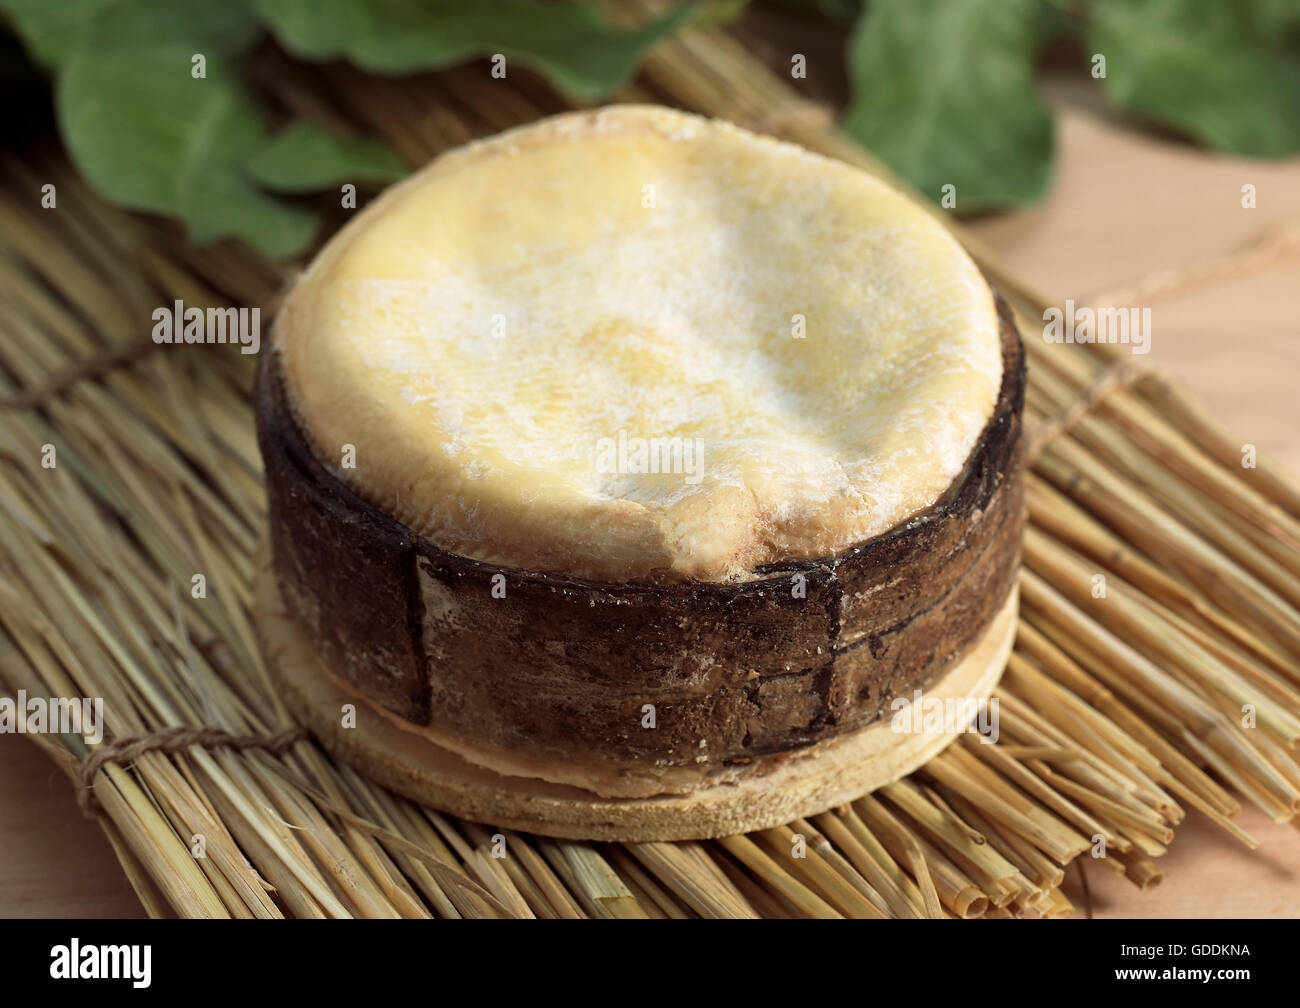 Cheese called Vacherin Mont d'Or, made from Cow's Milk in Switzerland and Jura in France Stock Photo